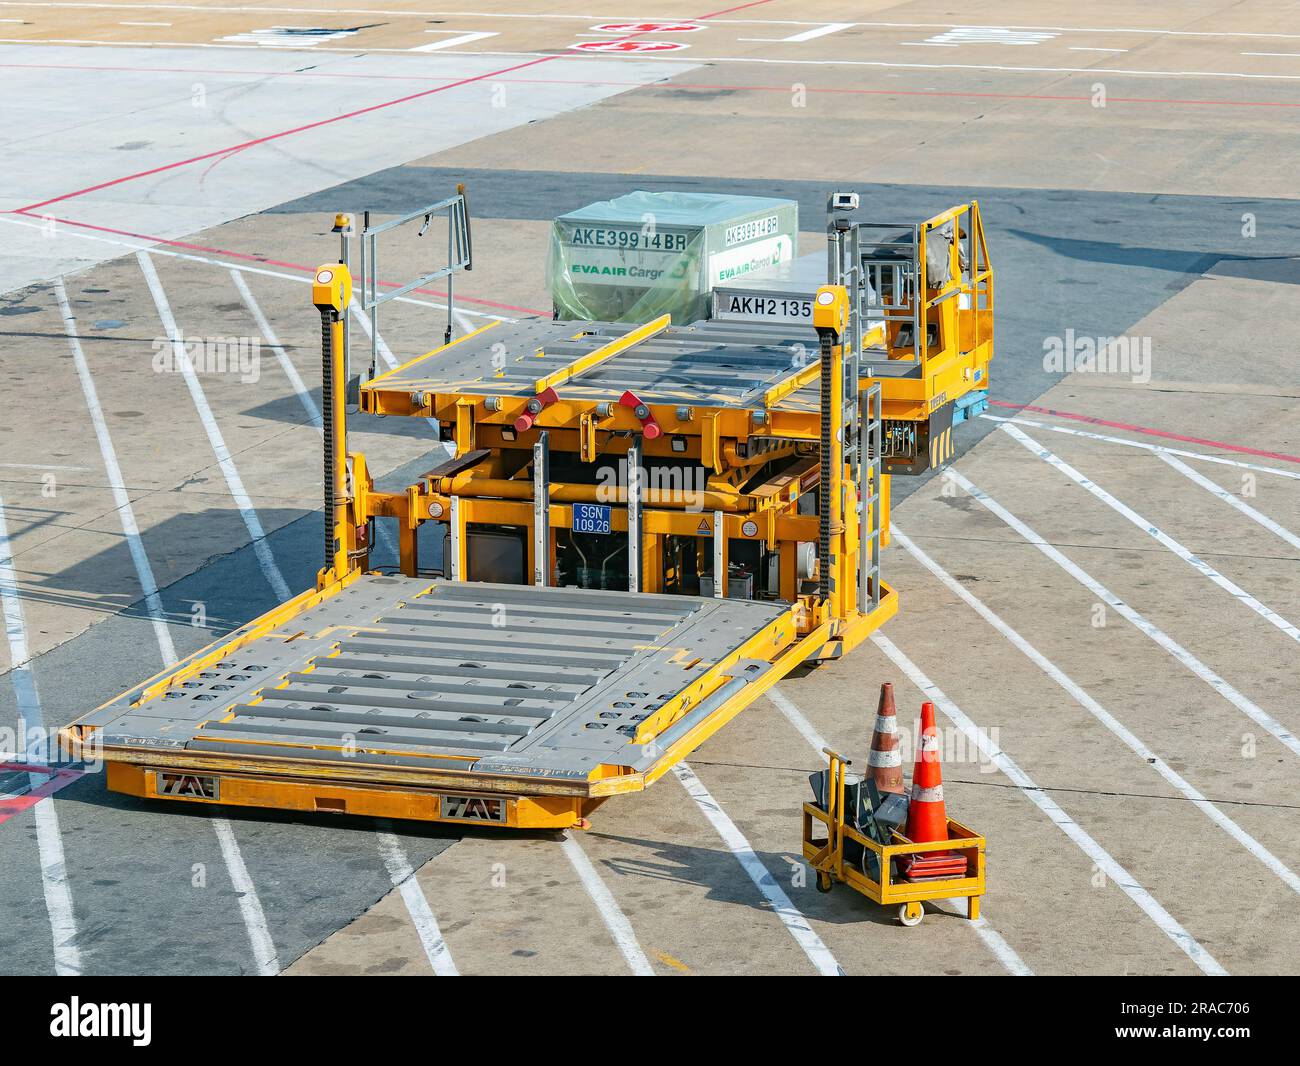 Ho Chi Minh City, Vietnam - April 13th 2018: Container pallet loader at Tan Son Nhat Airport in Ho Chi Minh City, Vietnam. The loader is being used to Stock Photo